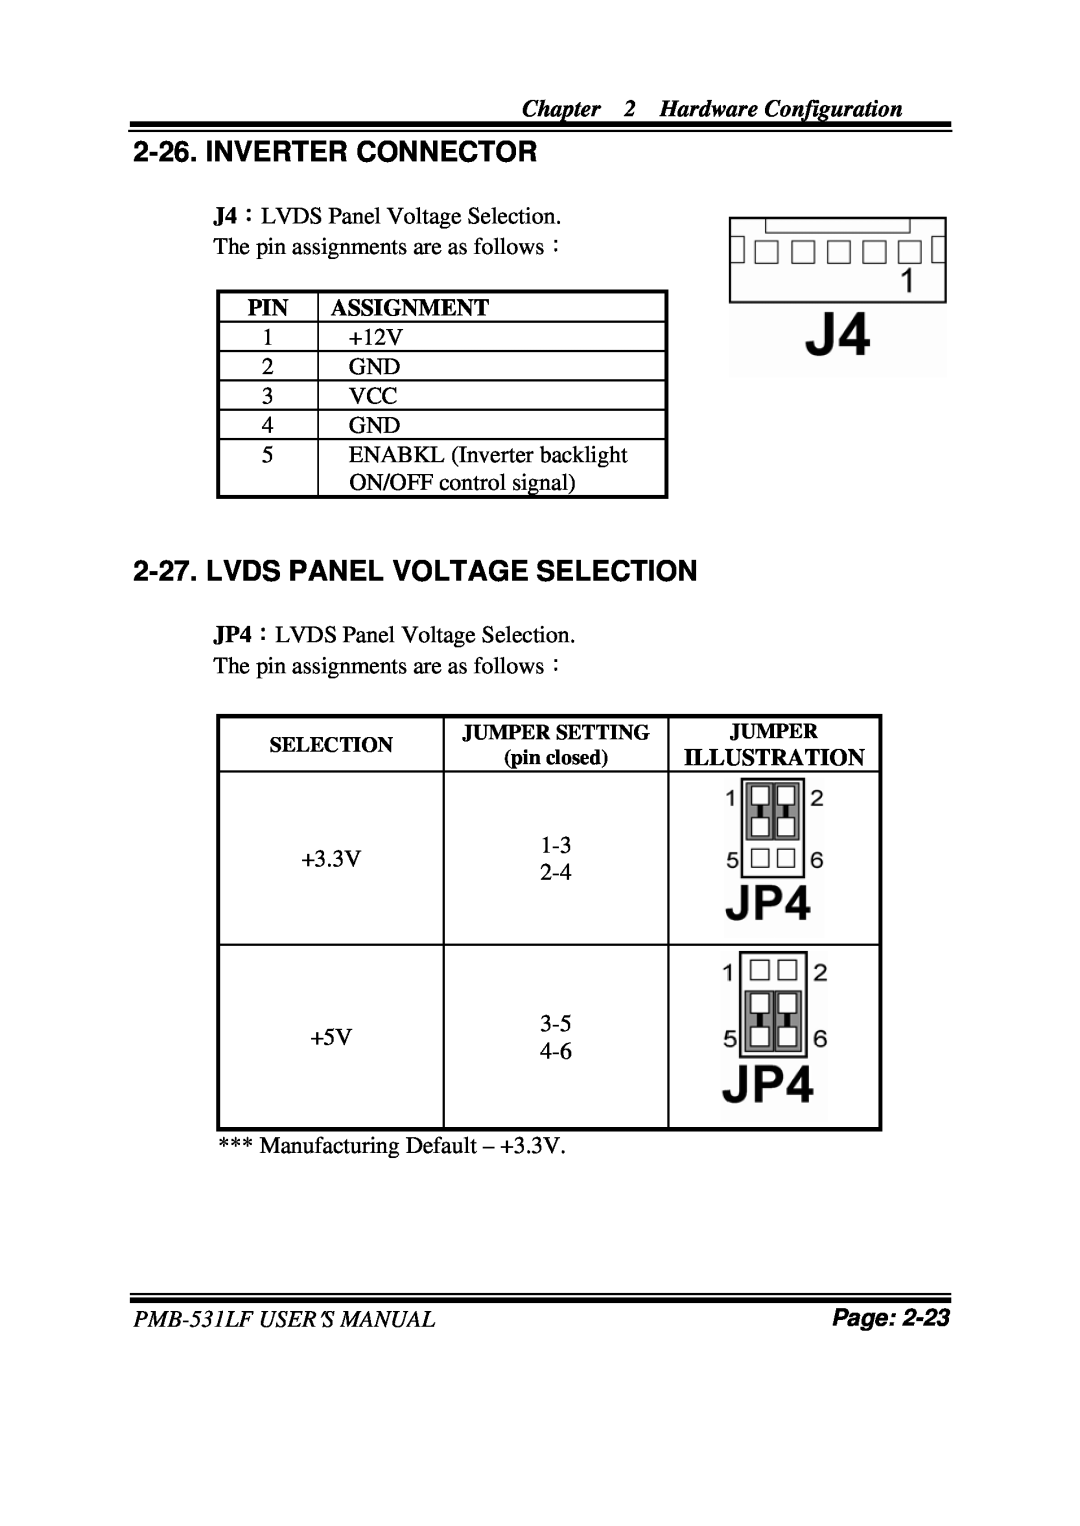 Intel PMB-531LF Inverter Connector, Lvds Panel Voltage Selection, Hardware Configuration, Pin Assignment, Illustration 